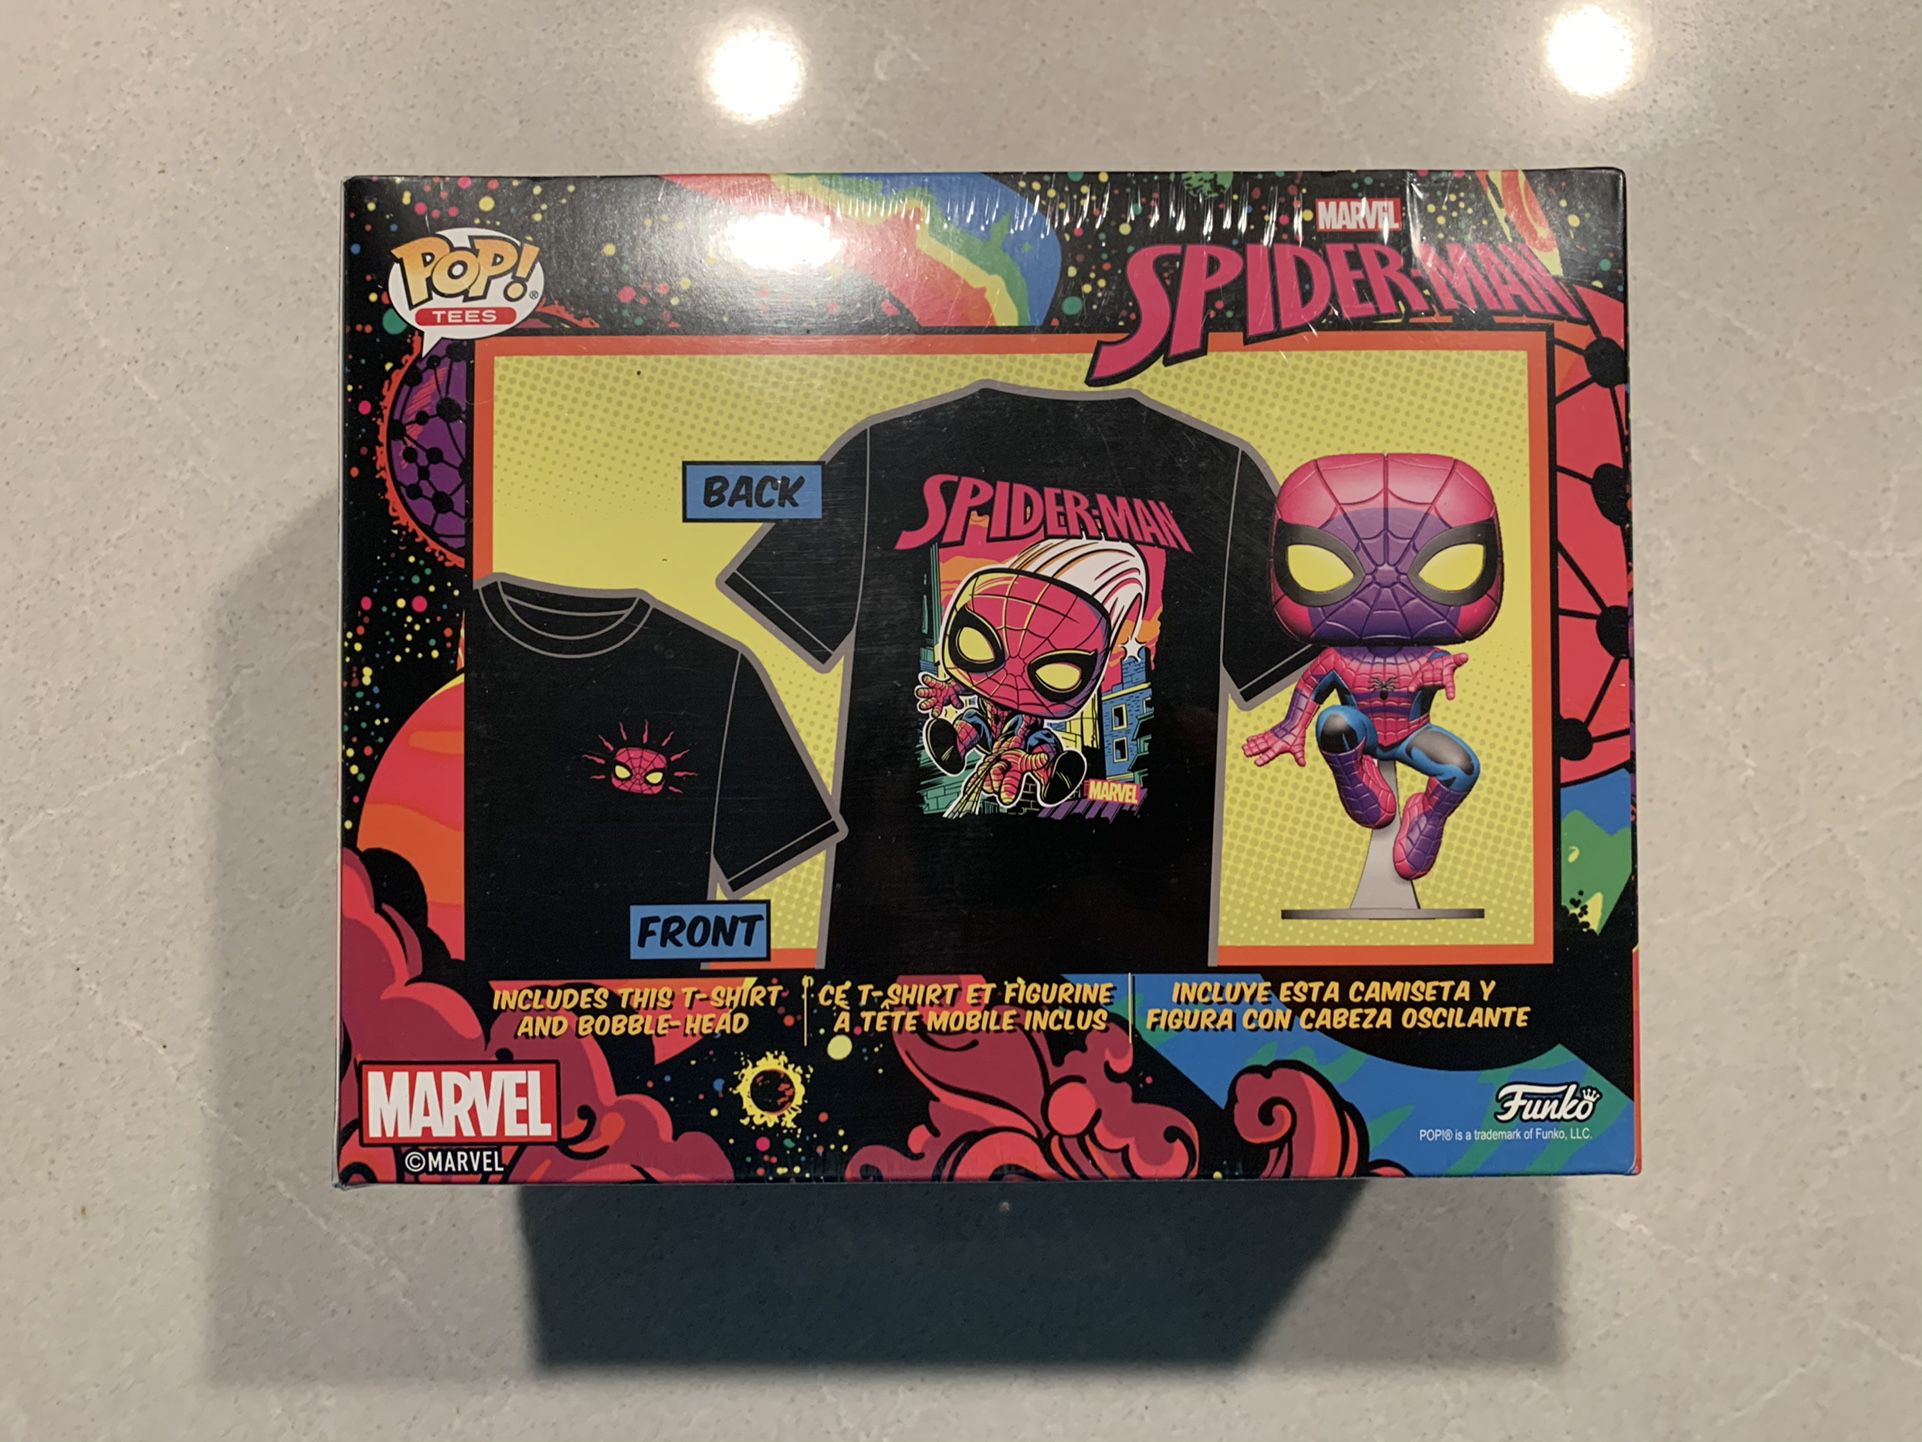 Black Light Spider-Man Funko Pop Boxset Large T-shirt *MINT SEALED* Target Exclusive Marvel Avengers 652 with protector